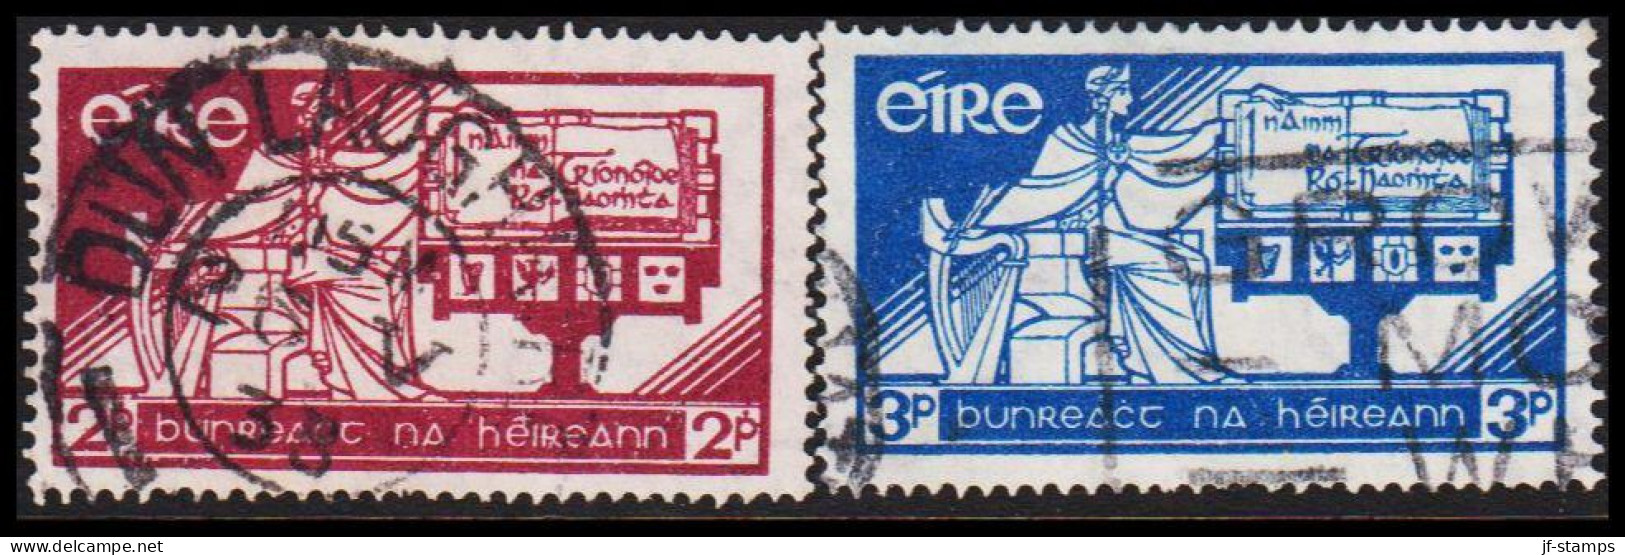 1937. EIRE. New Constitution Complete Set. (Michel 65-66) - JF544511 - Used Stamps